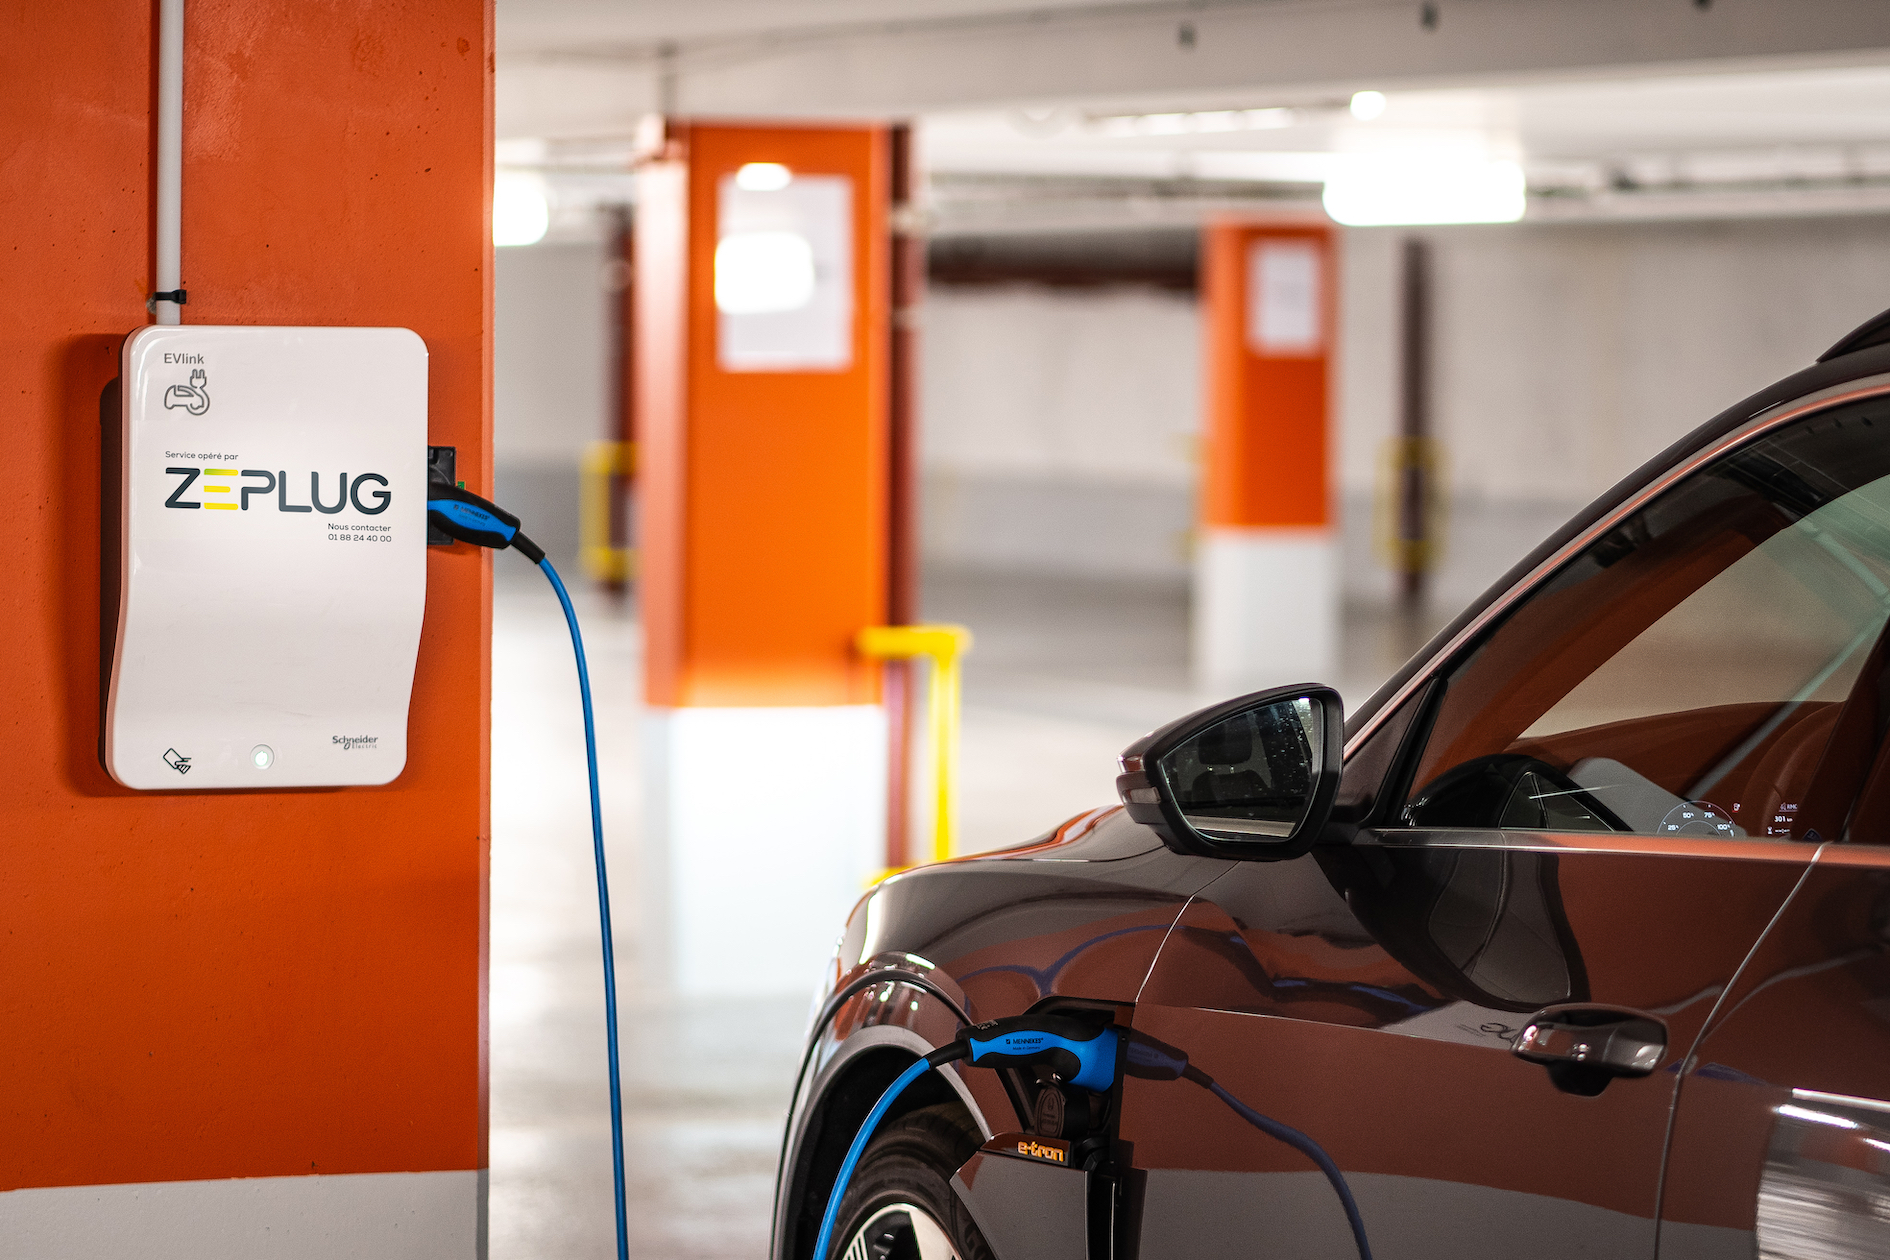 EV charging solution provider ChargeGuru strengthens European position with Zeplug merger to install over 100,000 charge points by 2025